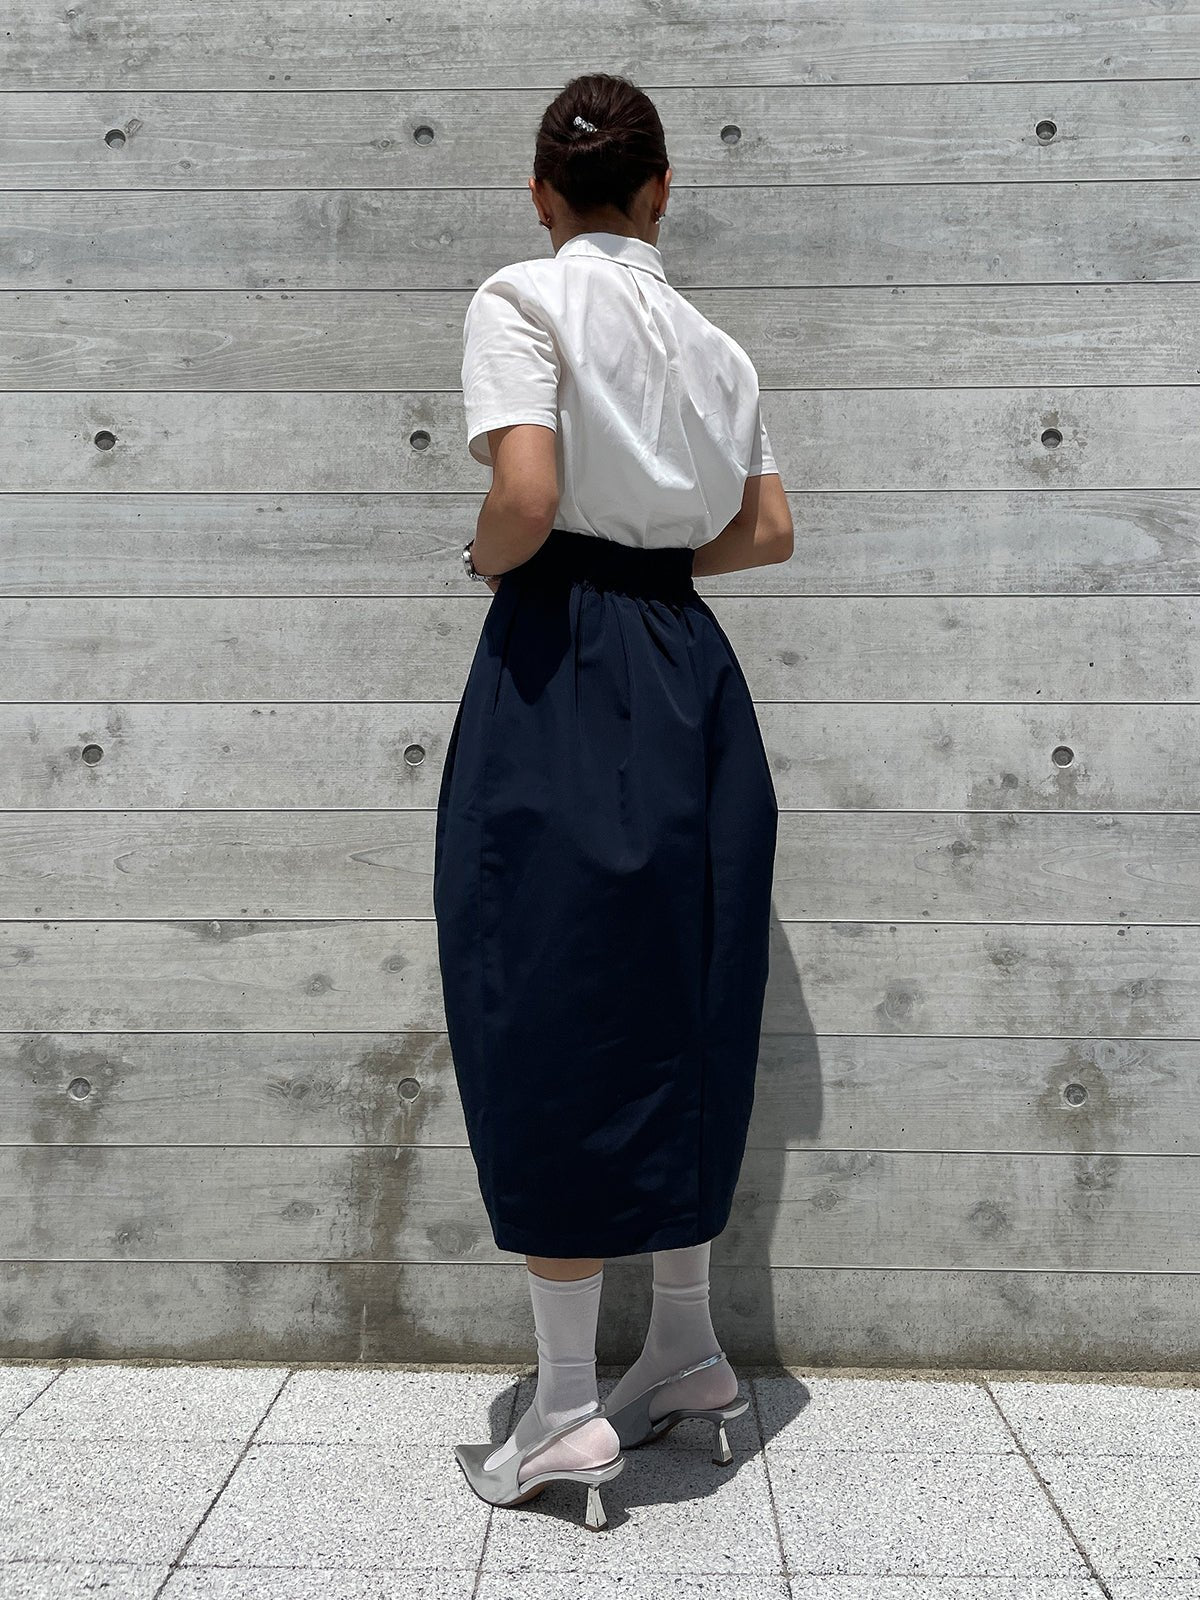 WINSOME COCOON Skirt Navy / ウィンサムコクーンスカート ネイビー